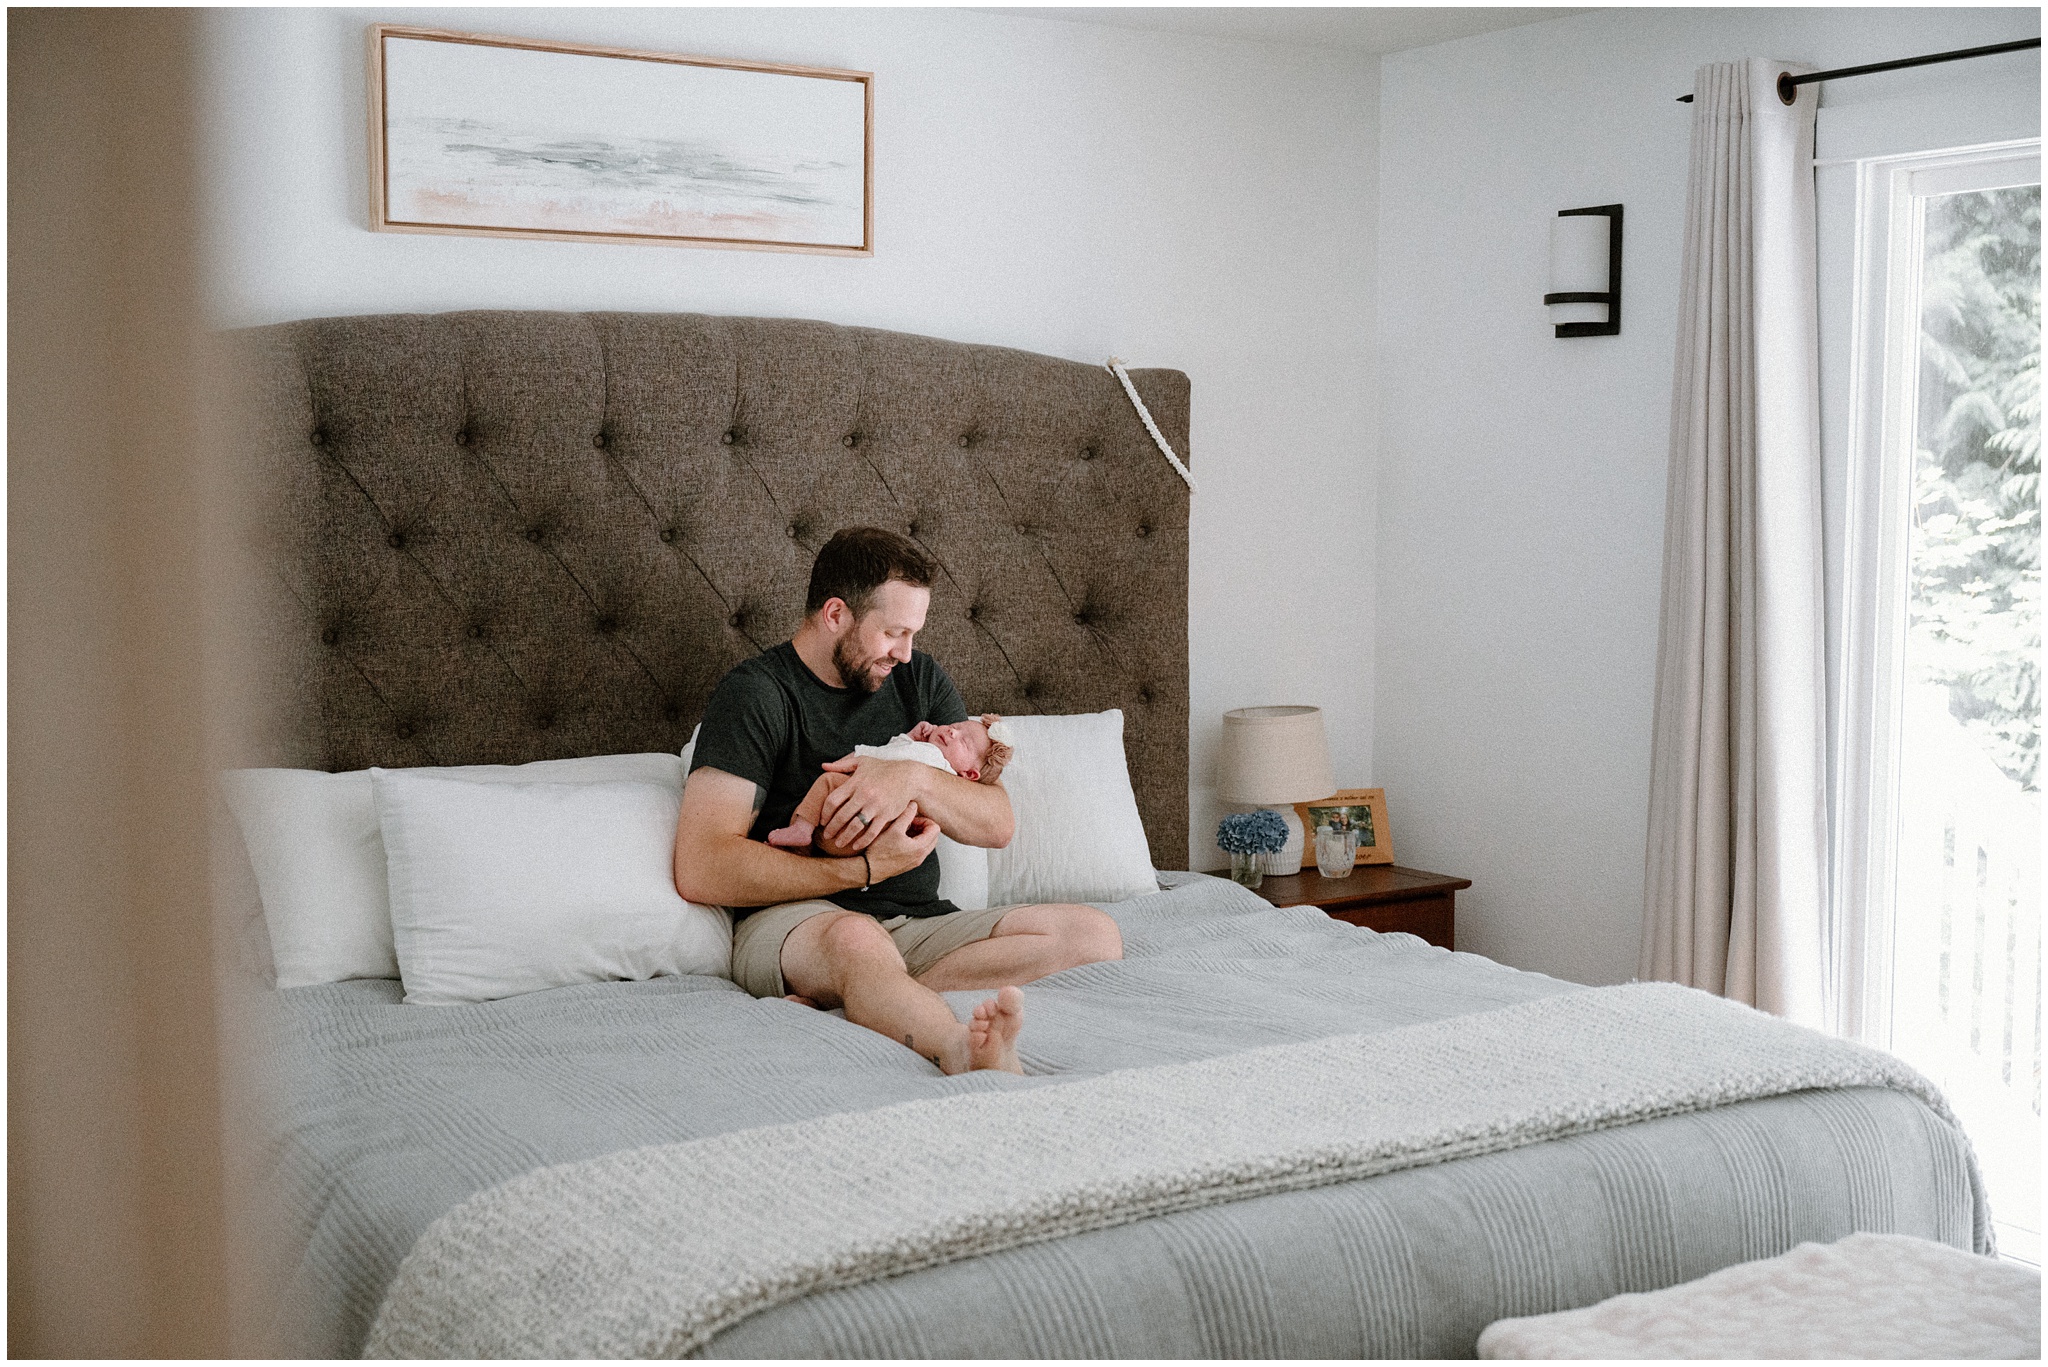 Dad snuggles with newborn daughter on bed. Photo by Meg Newton Photography.